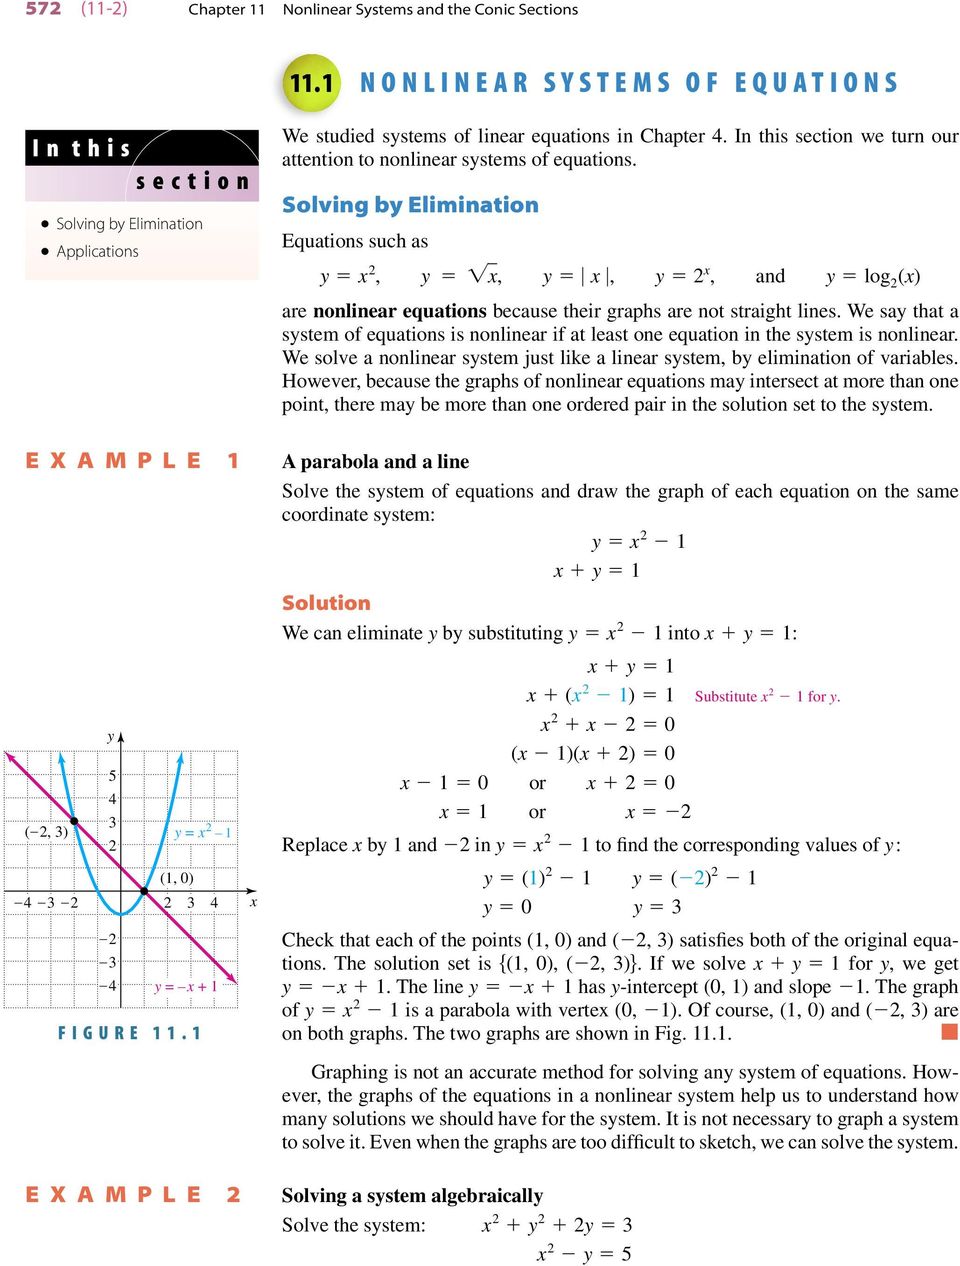 1 E X A M P L E x We studied systems of linear equations in Chapter 4. In this section we turn our attention to nonlinear systems of equations.